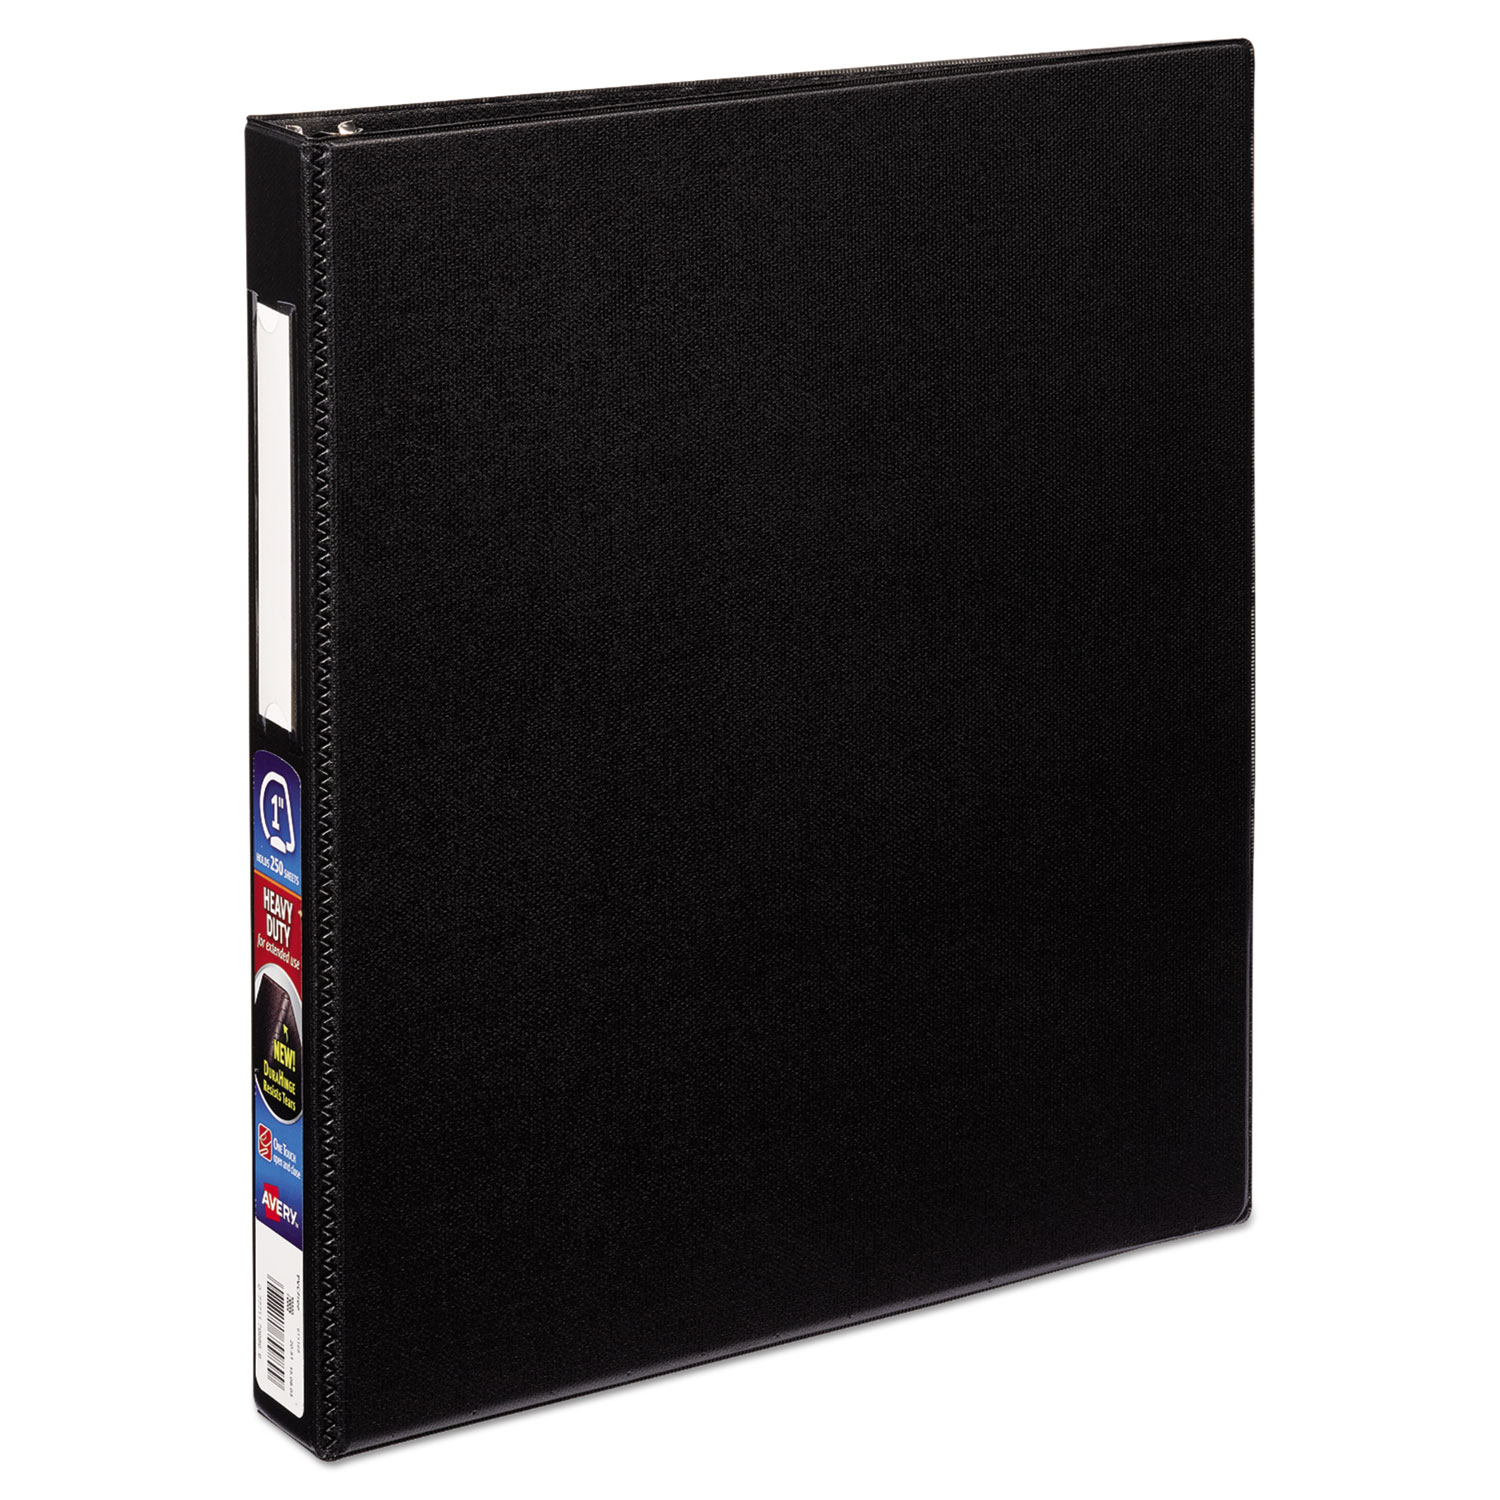  Avery 27256 Durable Non-View Binder with DuraHinge and Slant Rings, 3 Rings, 1 Capacity, 11 x 8.5, Black (AVE27256) 